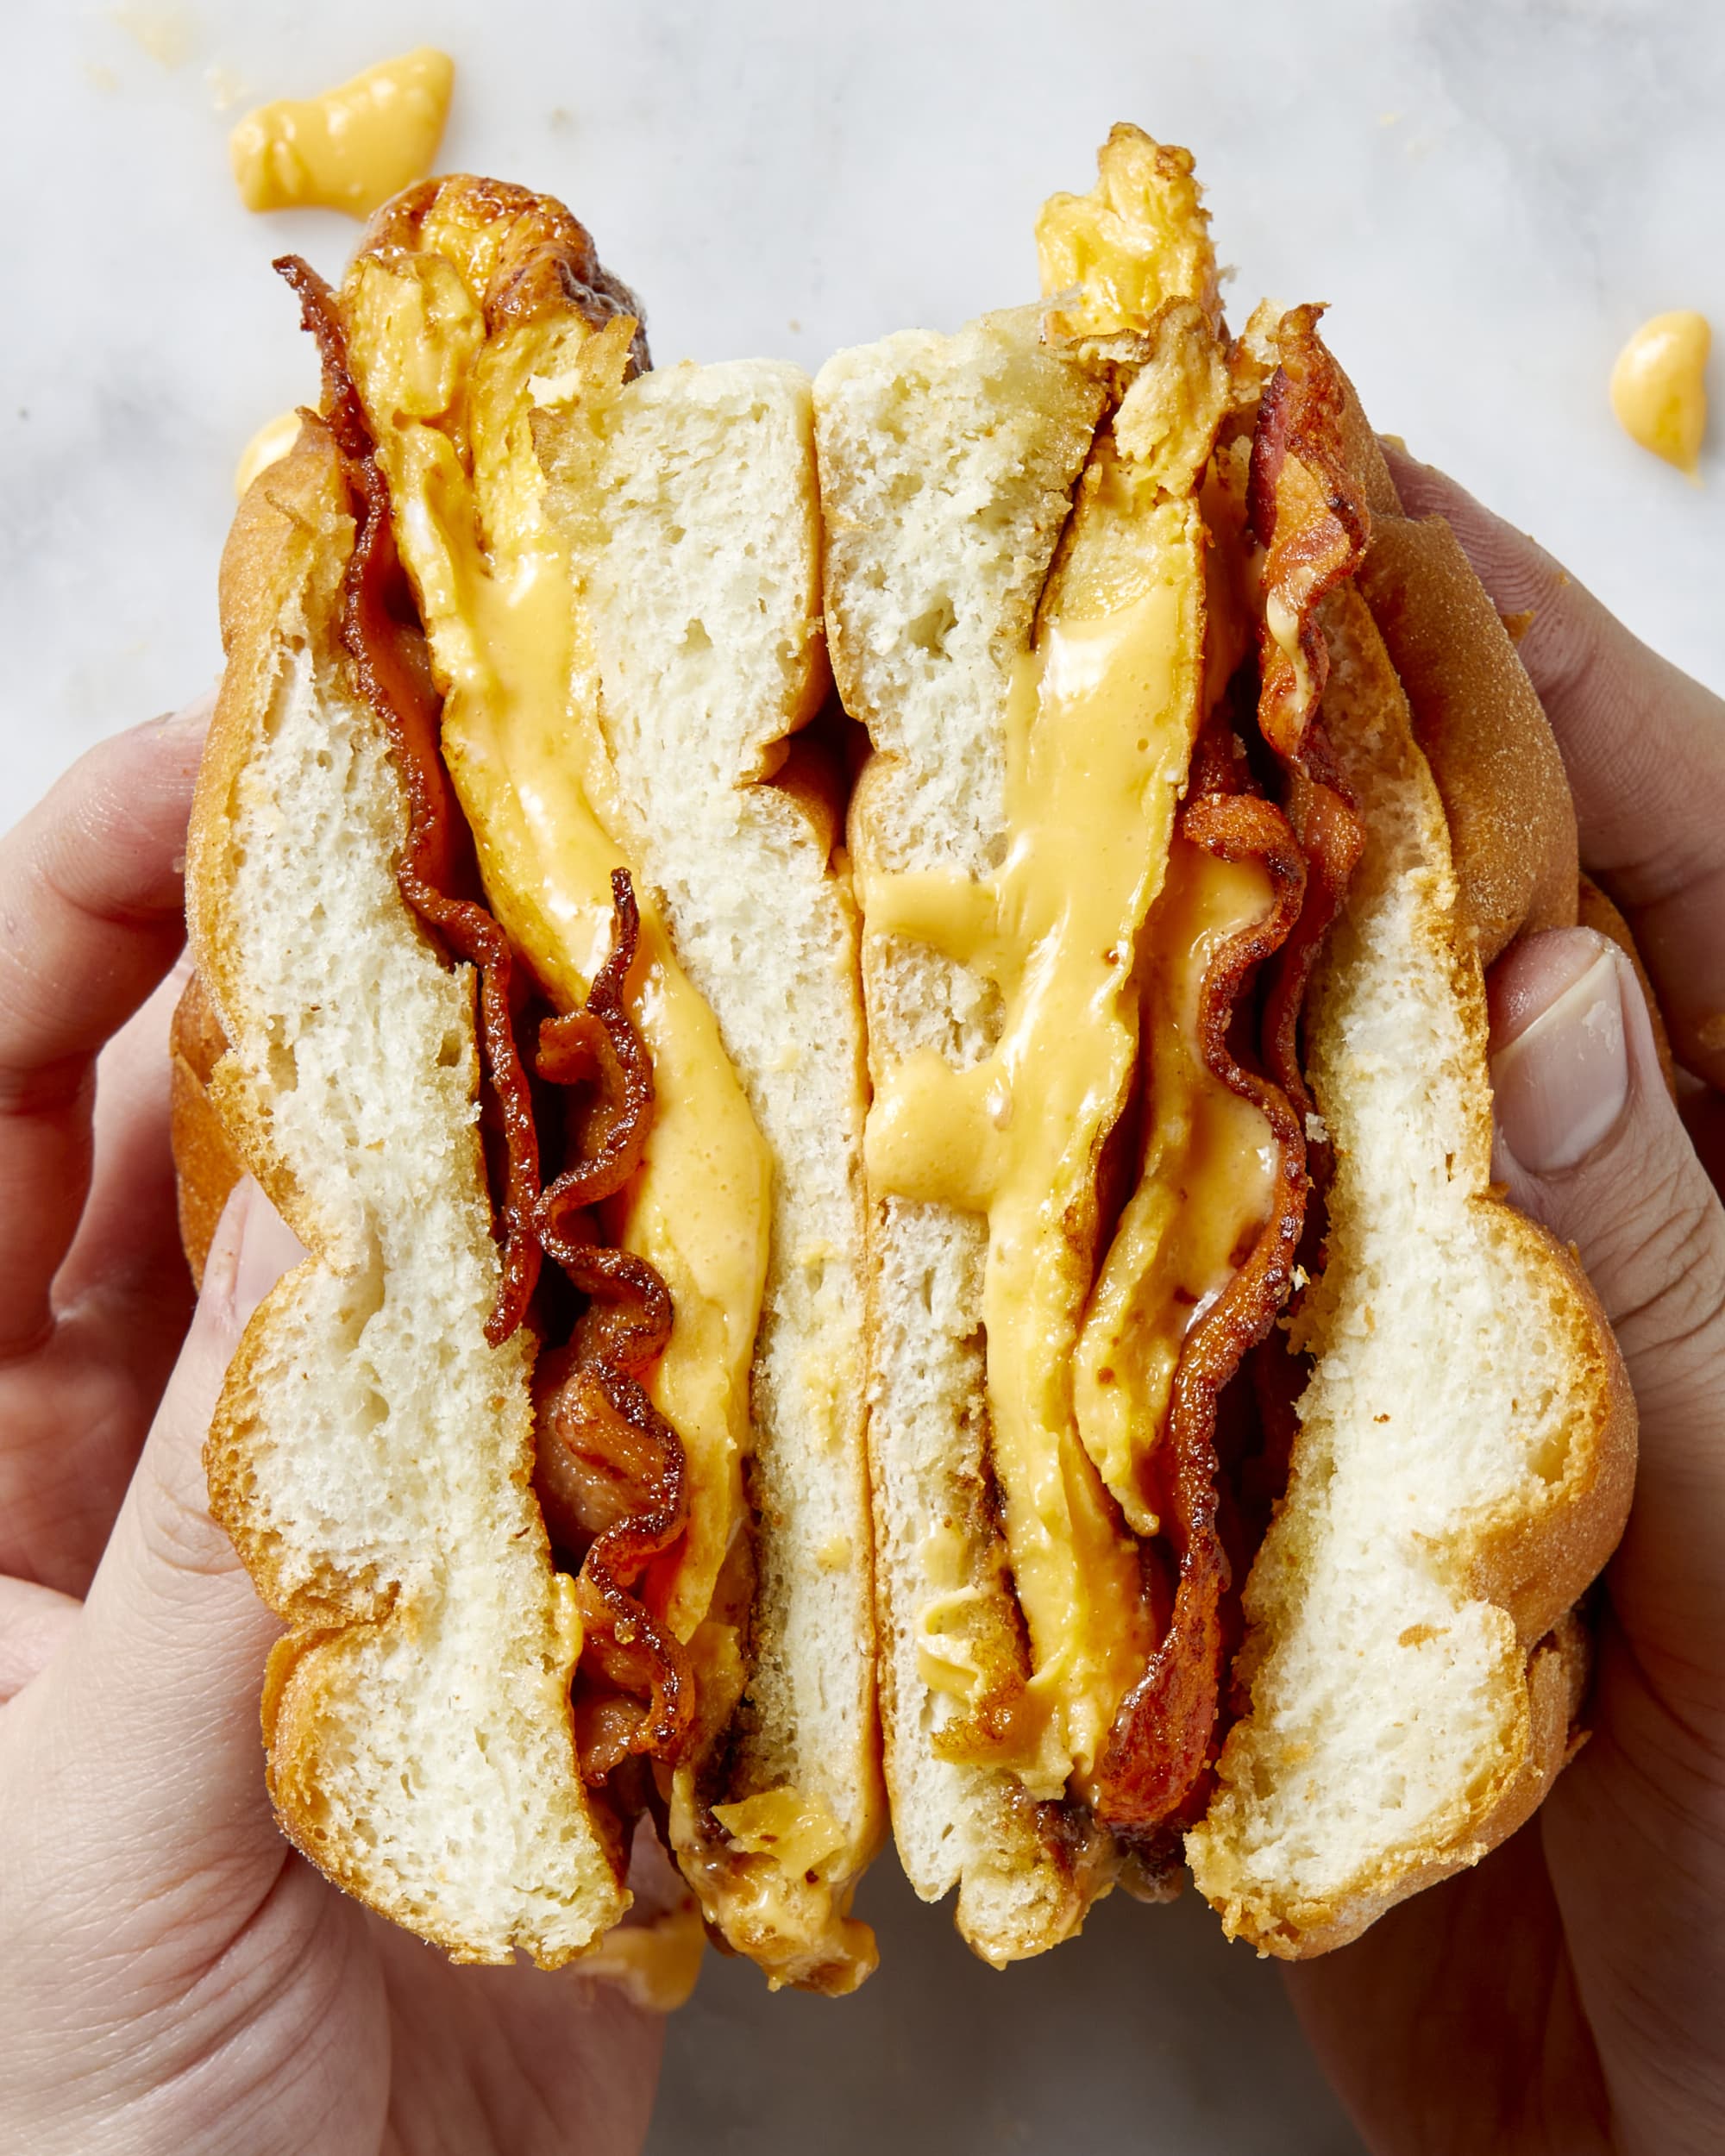 Bacon, Egg, and Cheese Sandwich Recipe (New York-Style)